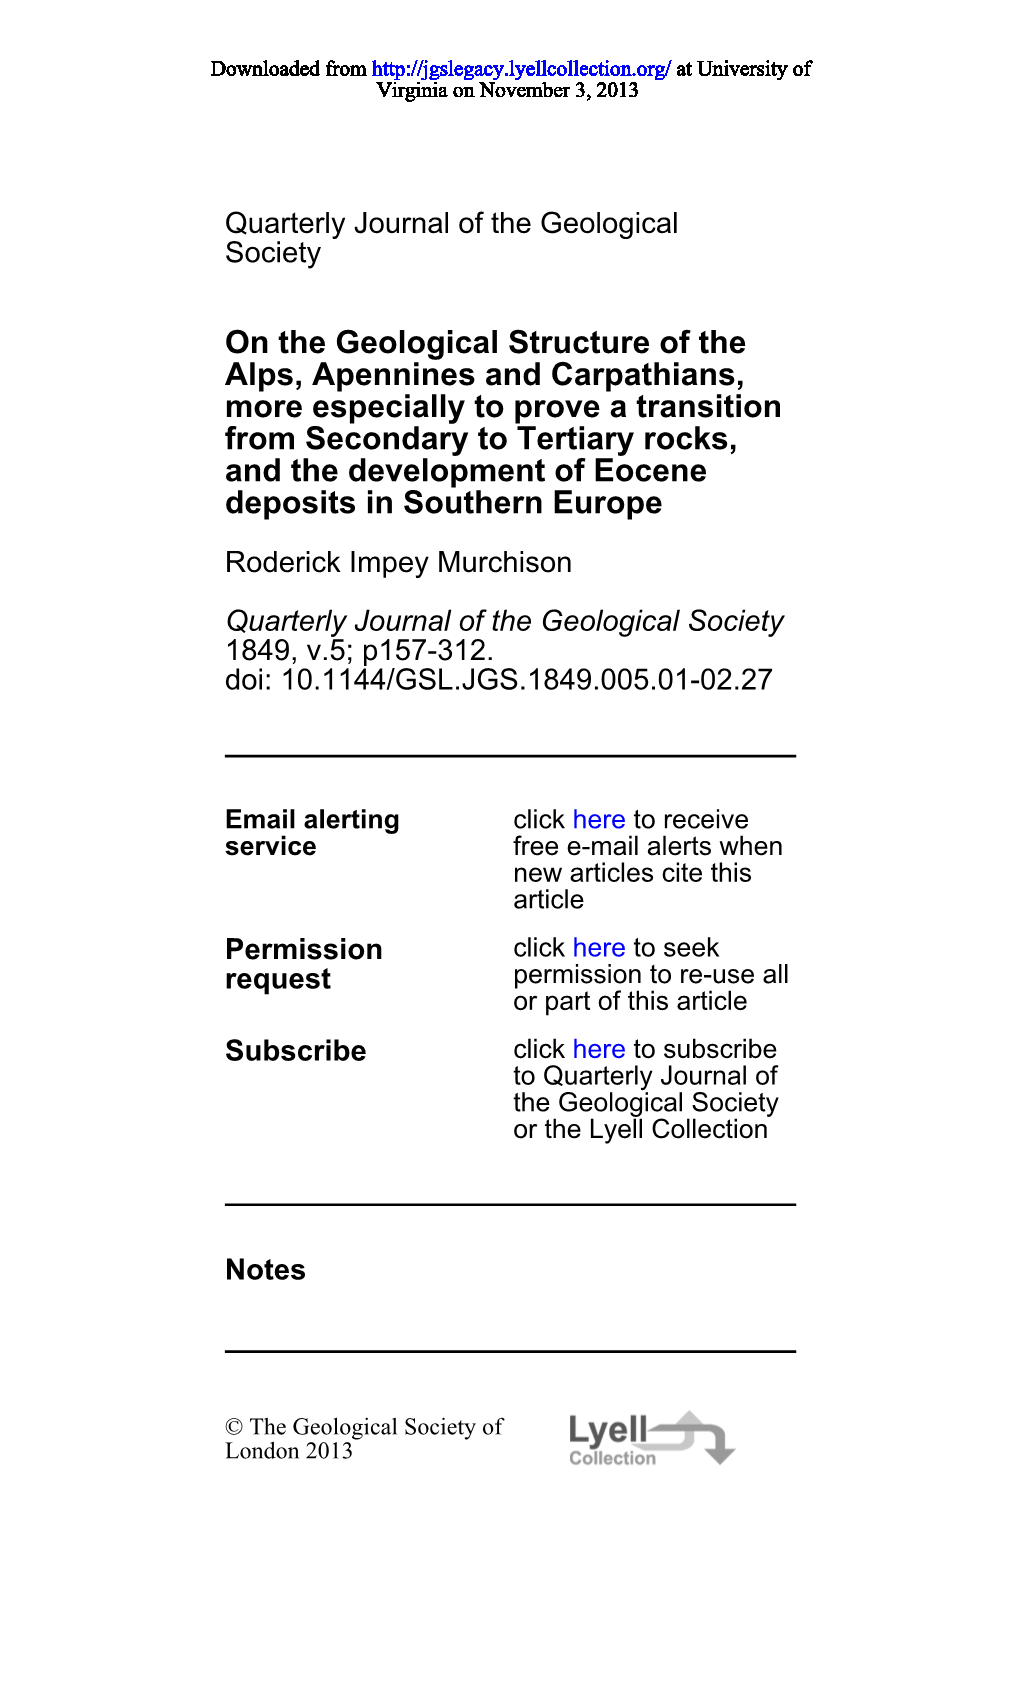 Deposits in Southern Europe and the Development of Eocene From